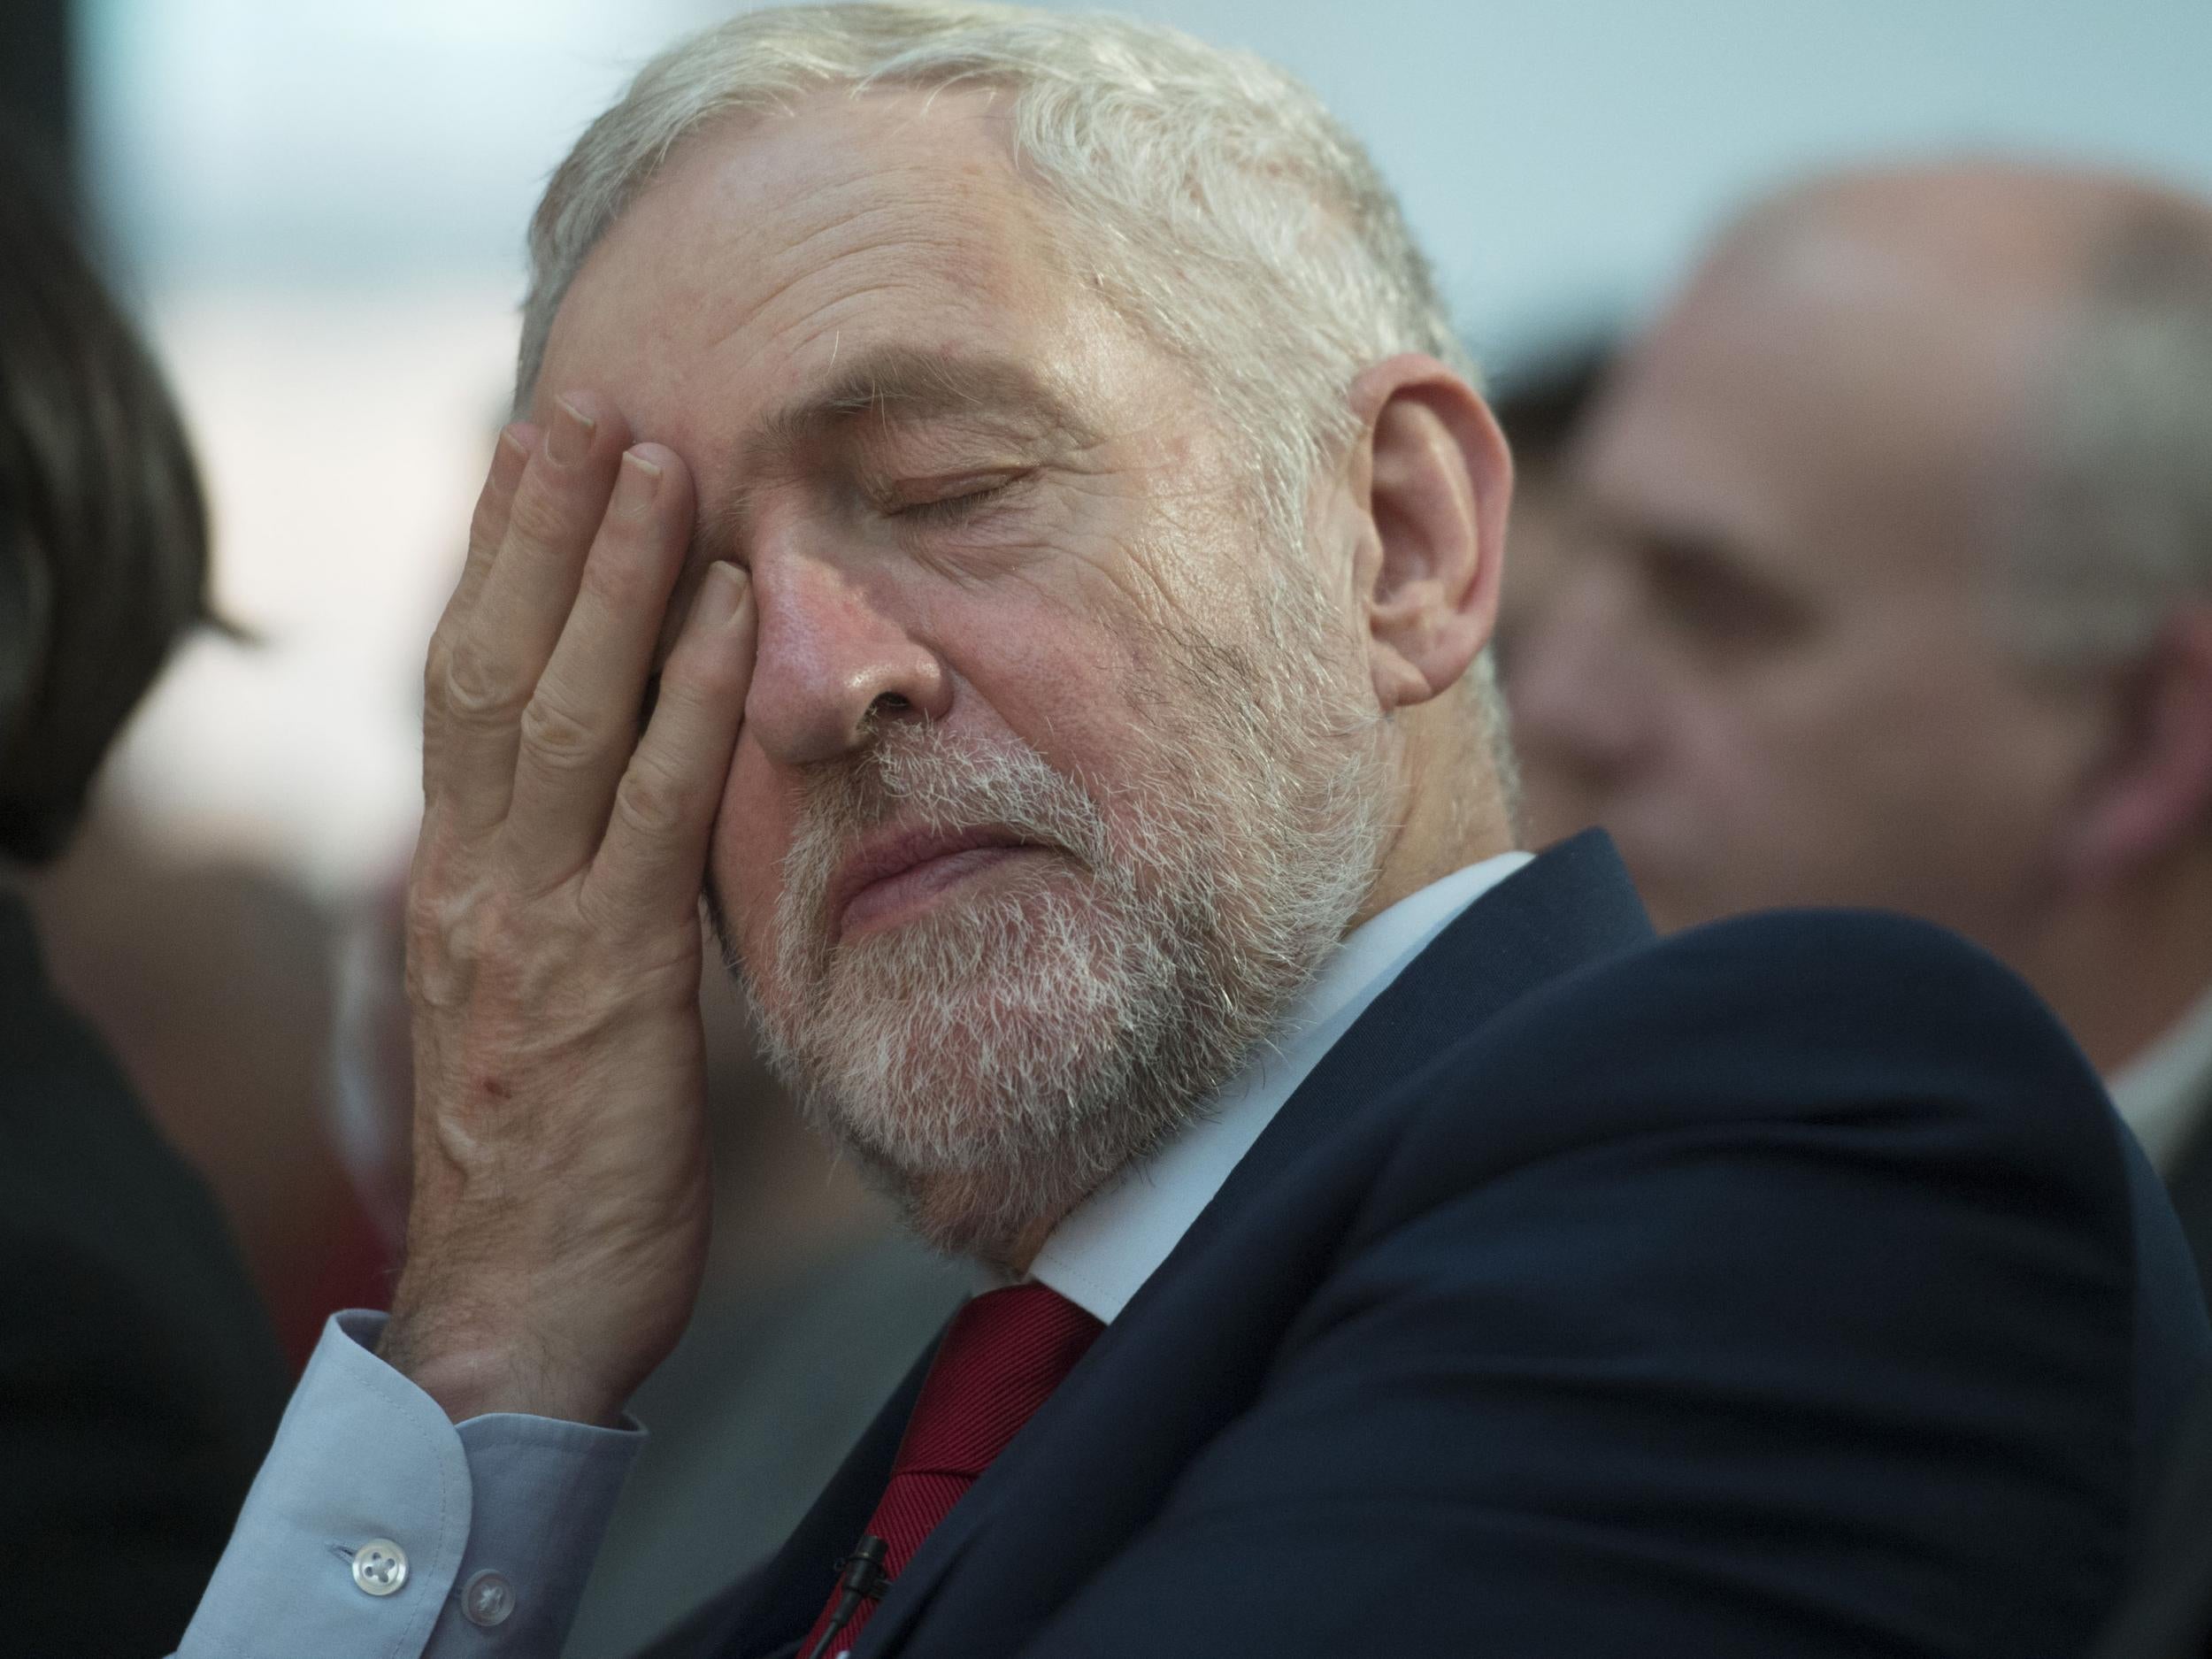 Corbyn has refused to firm up Labour’s Brexit plans